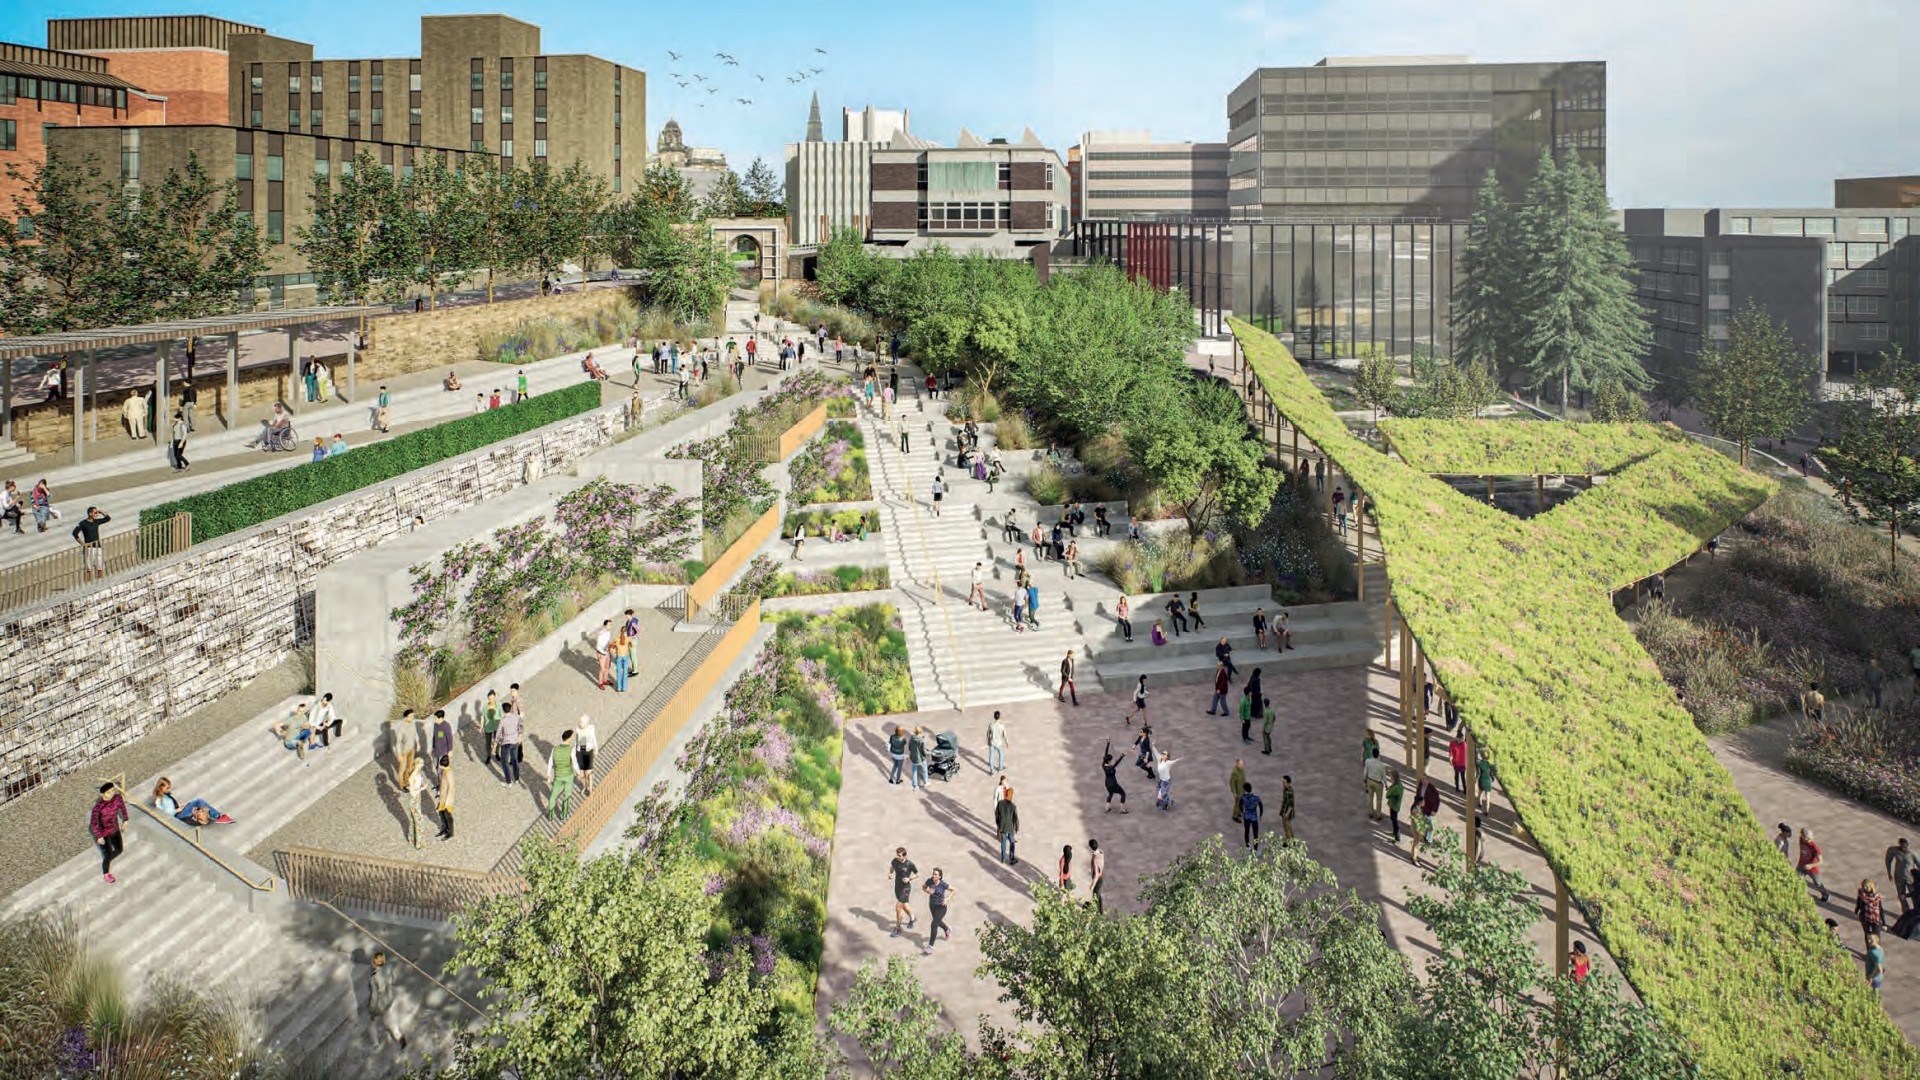 University of Strathclyde unveils ‘Heart Of Campus’ plan for city centre gardens